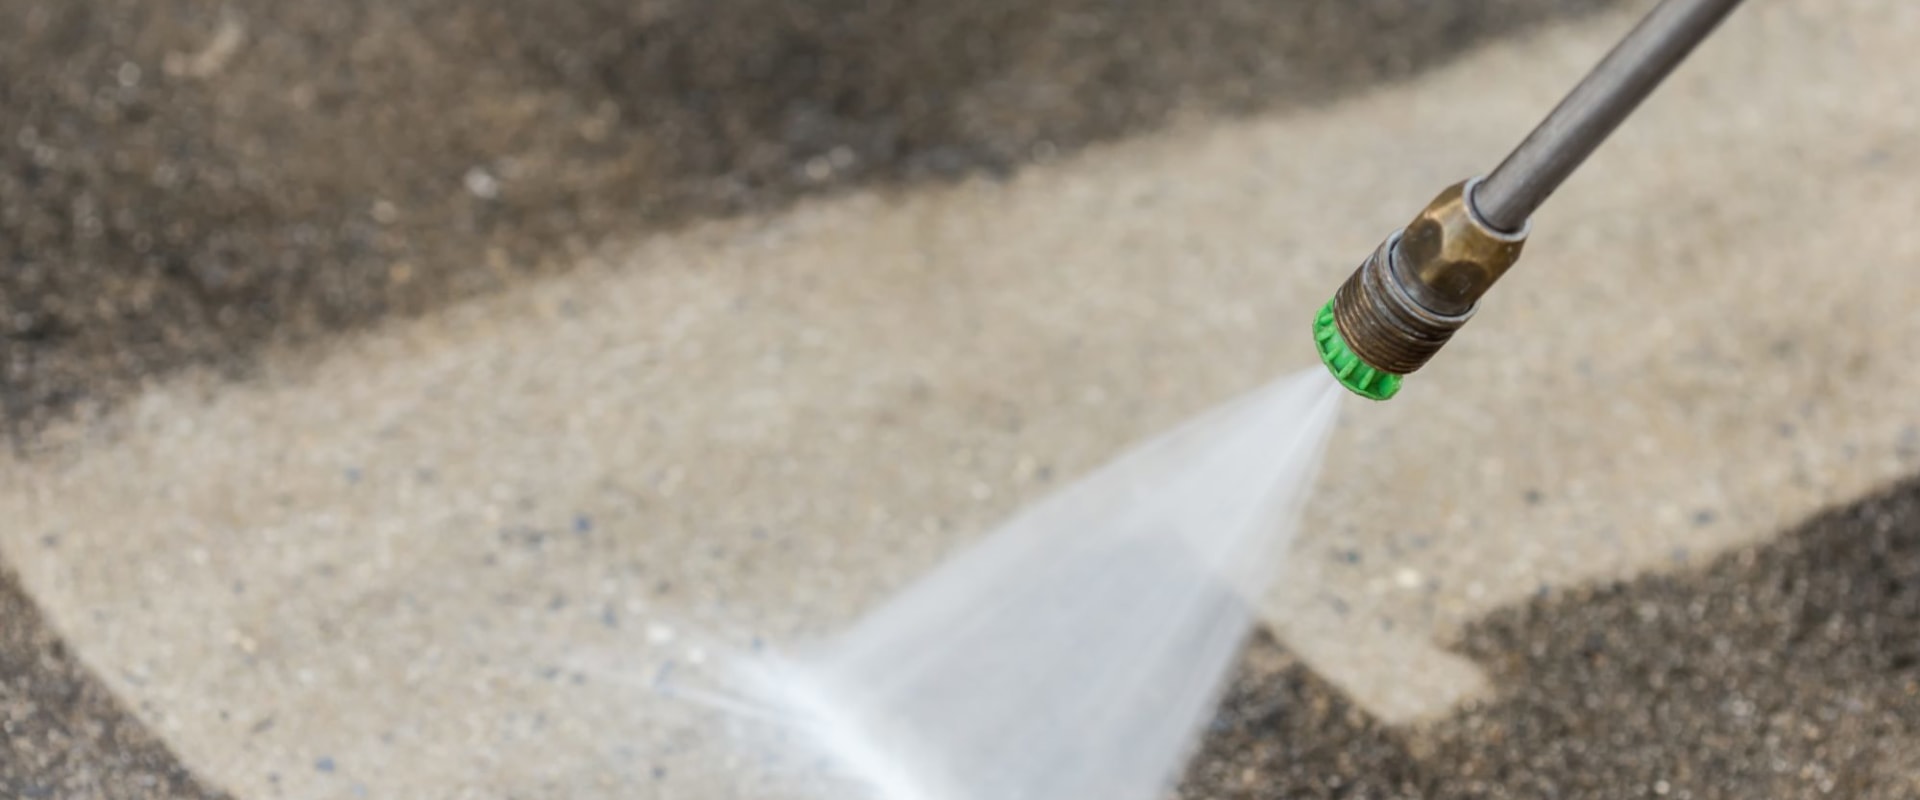 Which Nozzle is the Best Choice for Power Washing Your Deck?